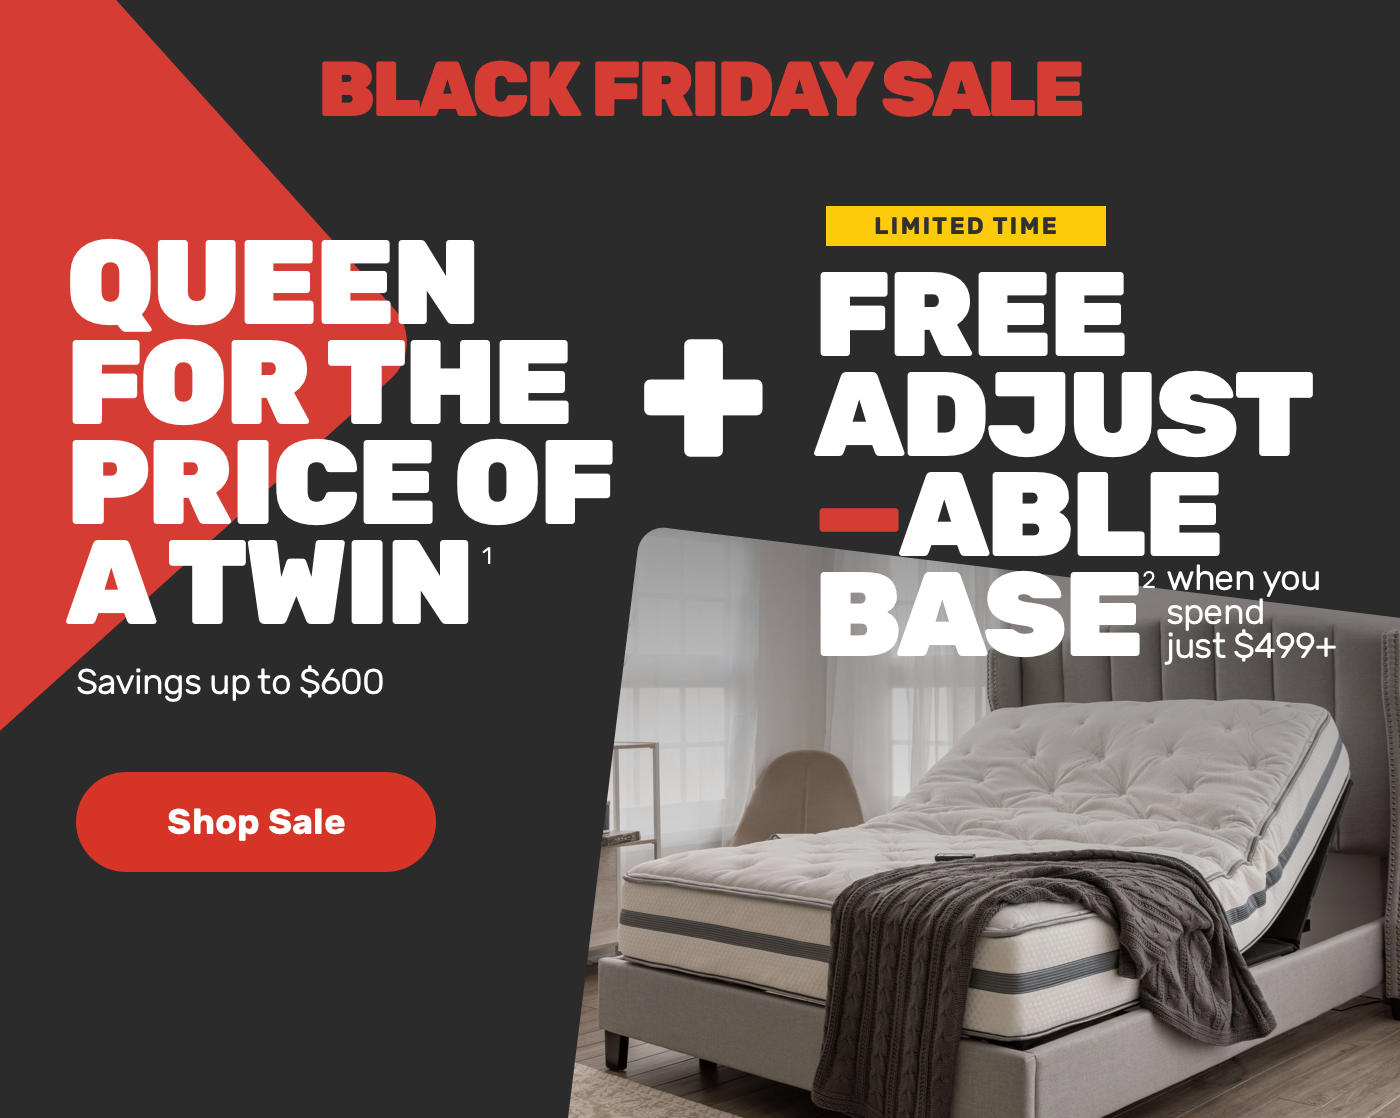 Black Friday Sale. Queen for the price of a twin. Plus Free Adjustable Base. Shop Sale.